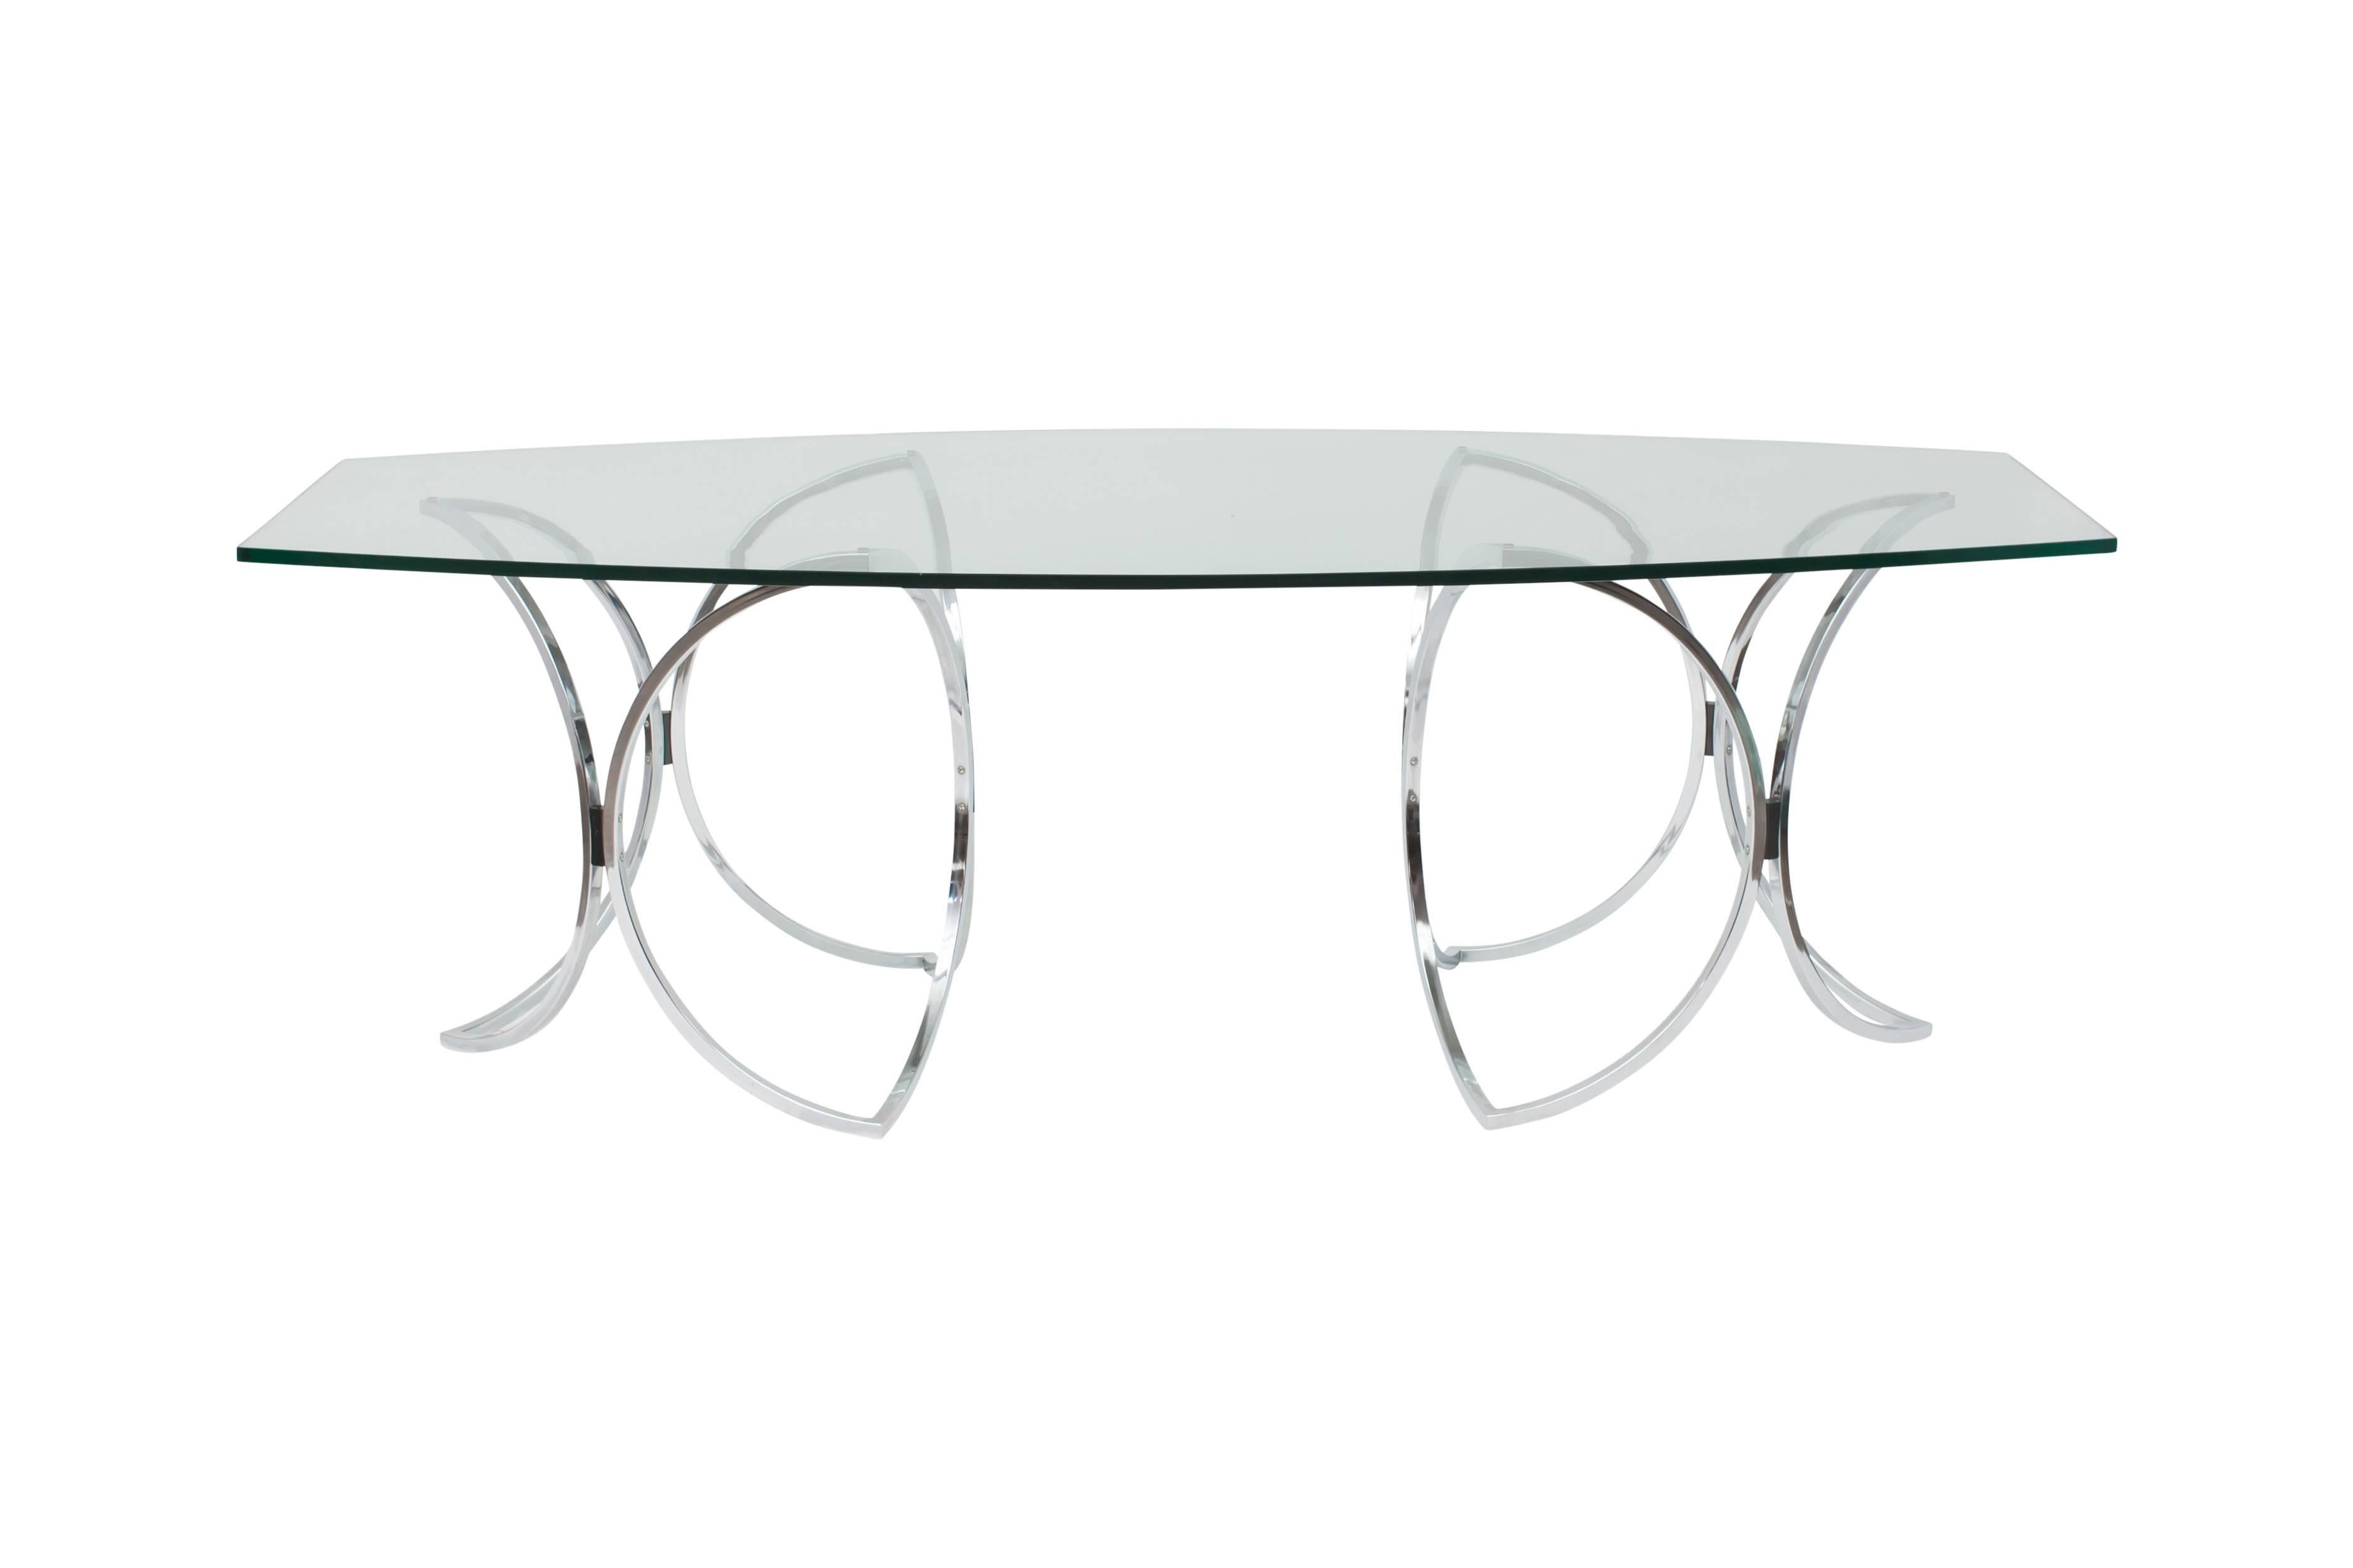 Extraordinary chrome and glass dining table
by Maison Jansen.

Graceful chrome feet support the heavy glass top.

Measures: W 220, D 100, H 73 cm.